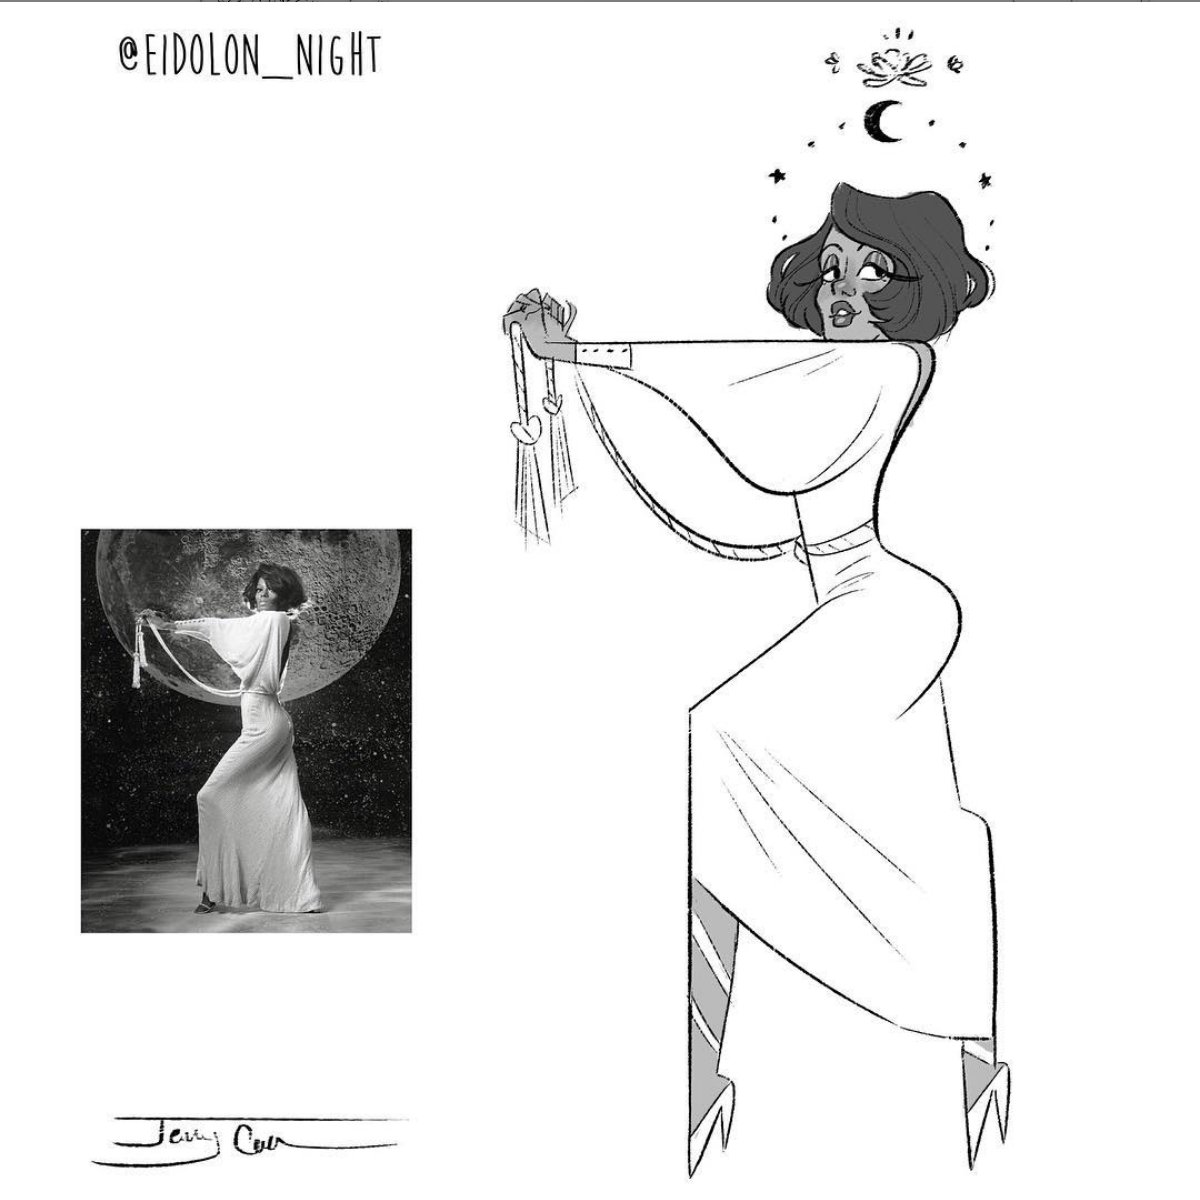 Going so far back with this TBT that I can't find the original file from 2017 so I had to take a screenshot! Diana Ross with a stunning pose I HAD to draw! 